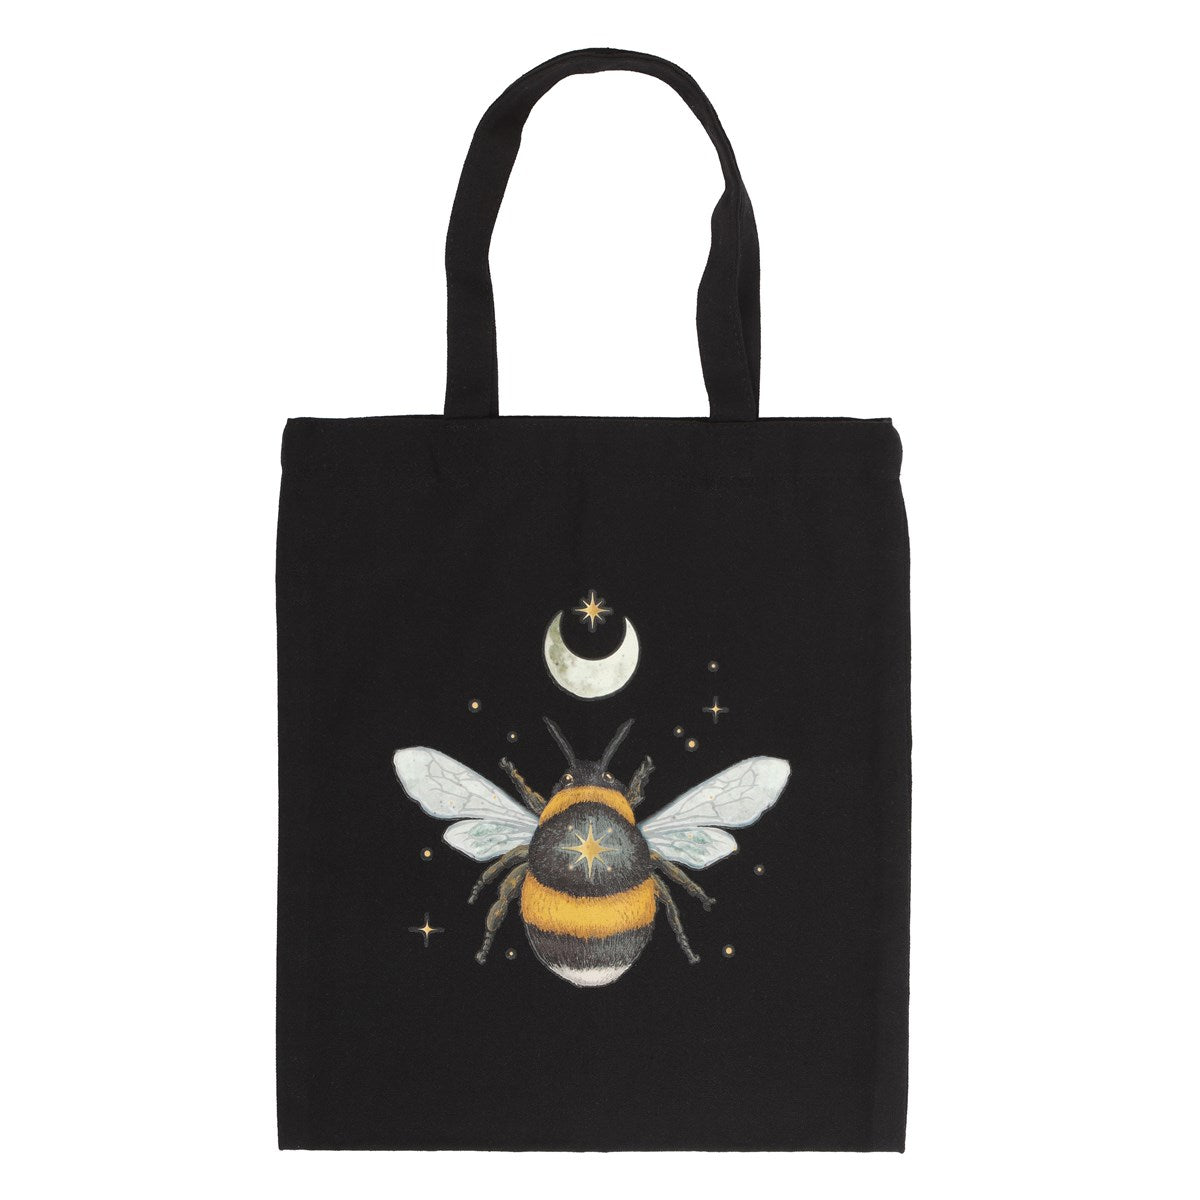 BAG - FOREST BEE POLYCOTTON TOTE